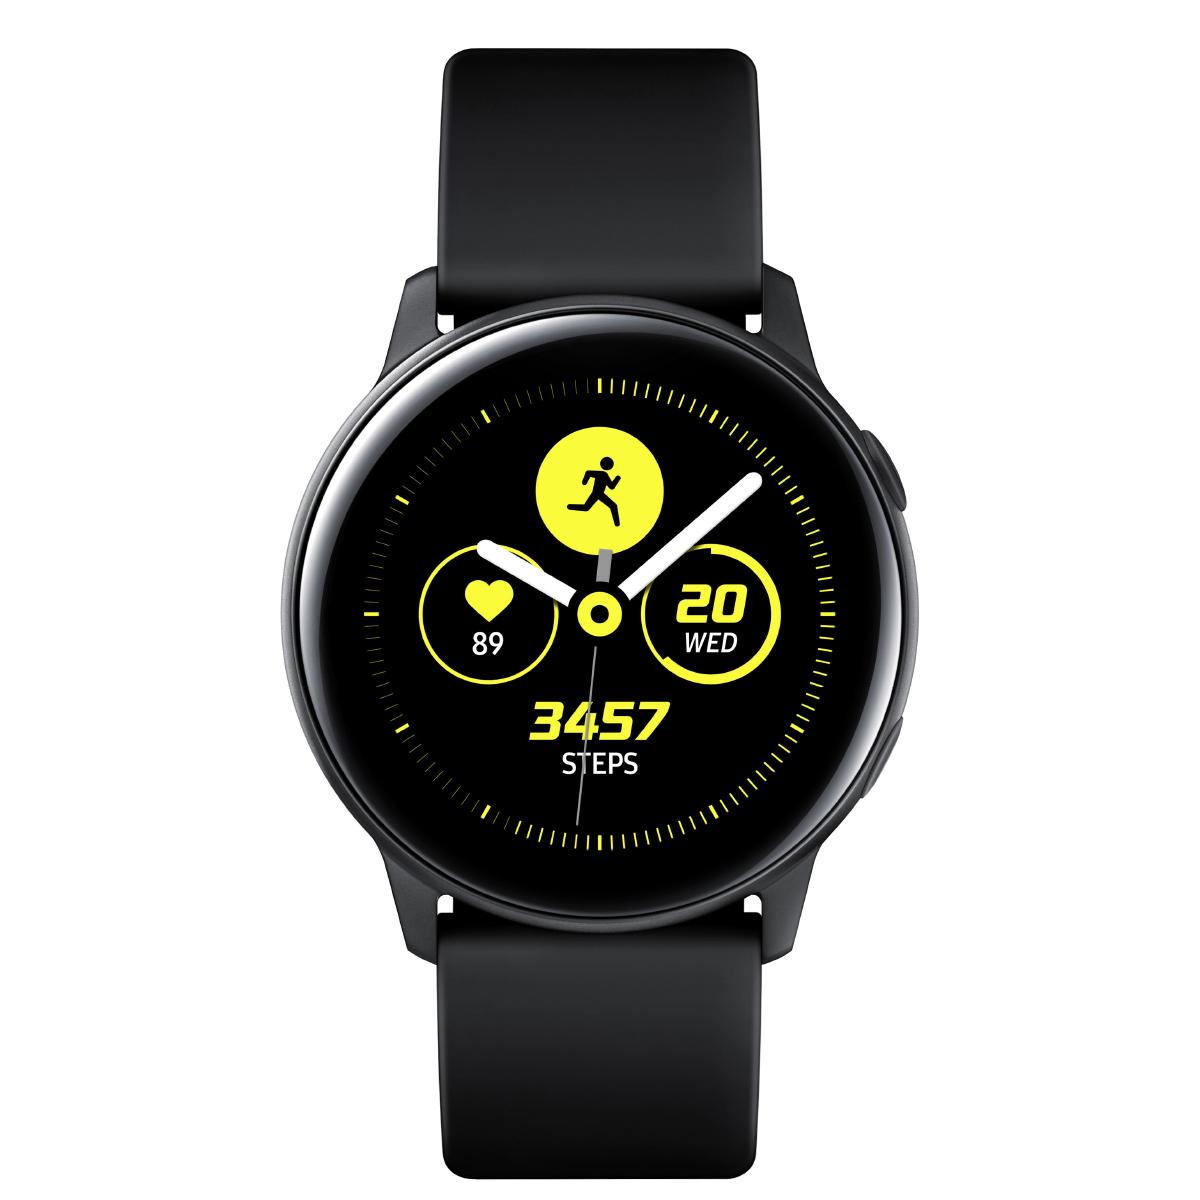 Up to 6 months to pay on selected smart watches and wearable tech when you spend £99 or more.